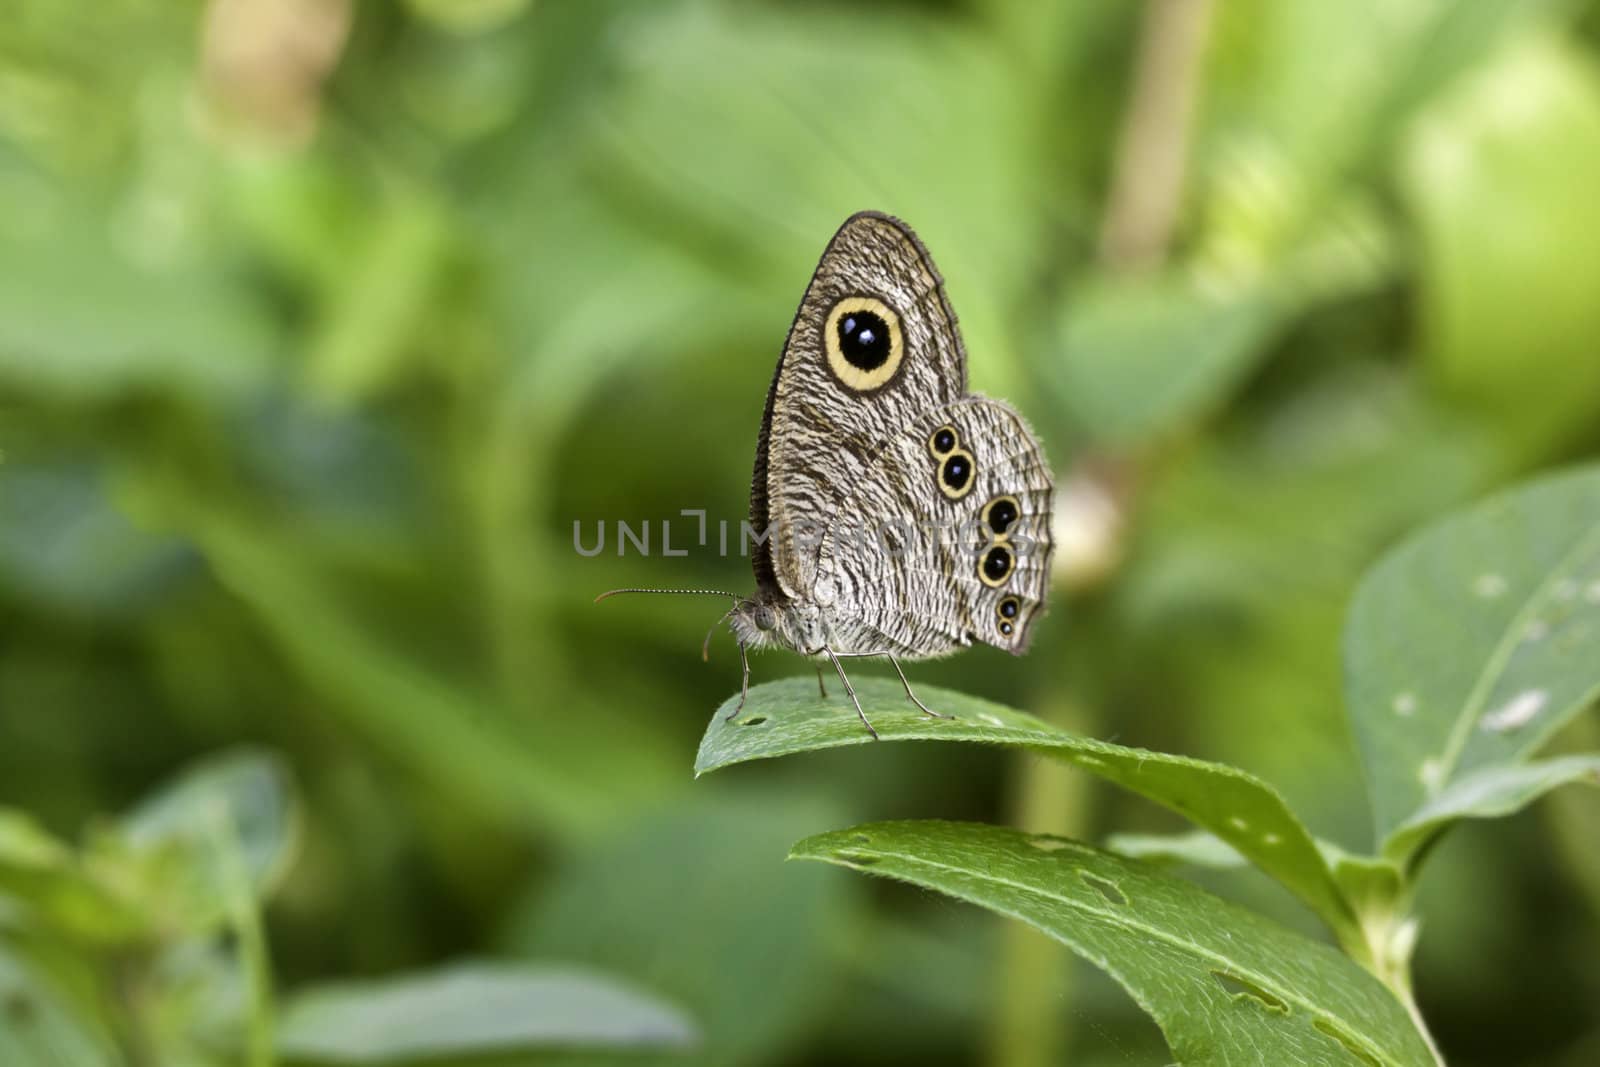 butterfly on a green leaf by takepicsforfun